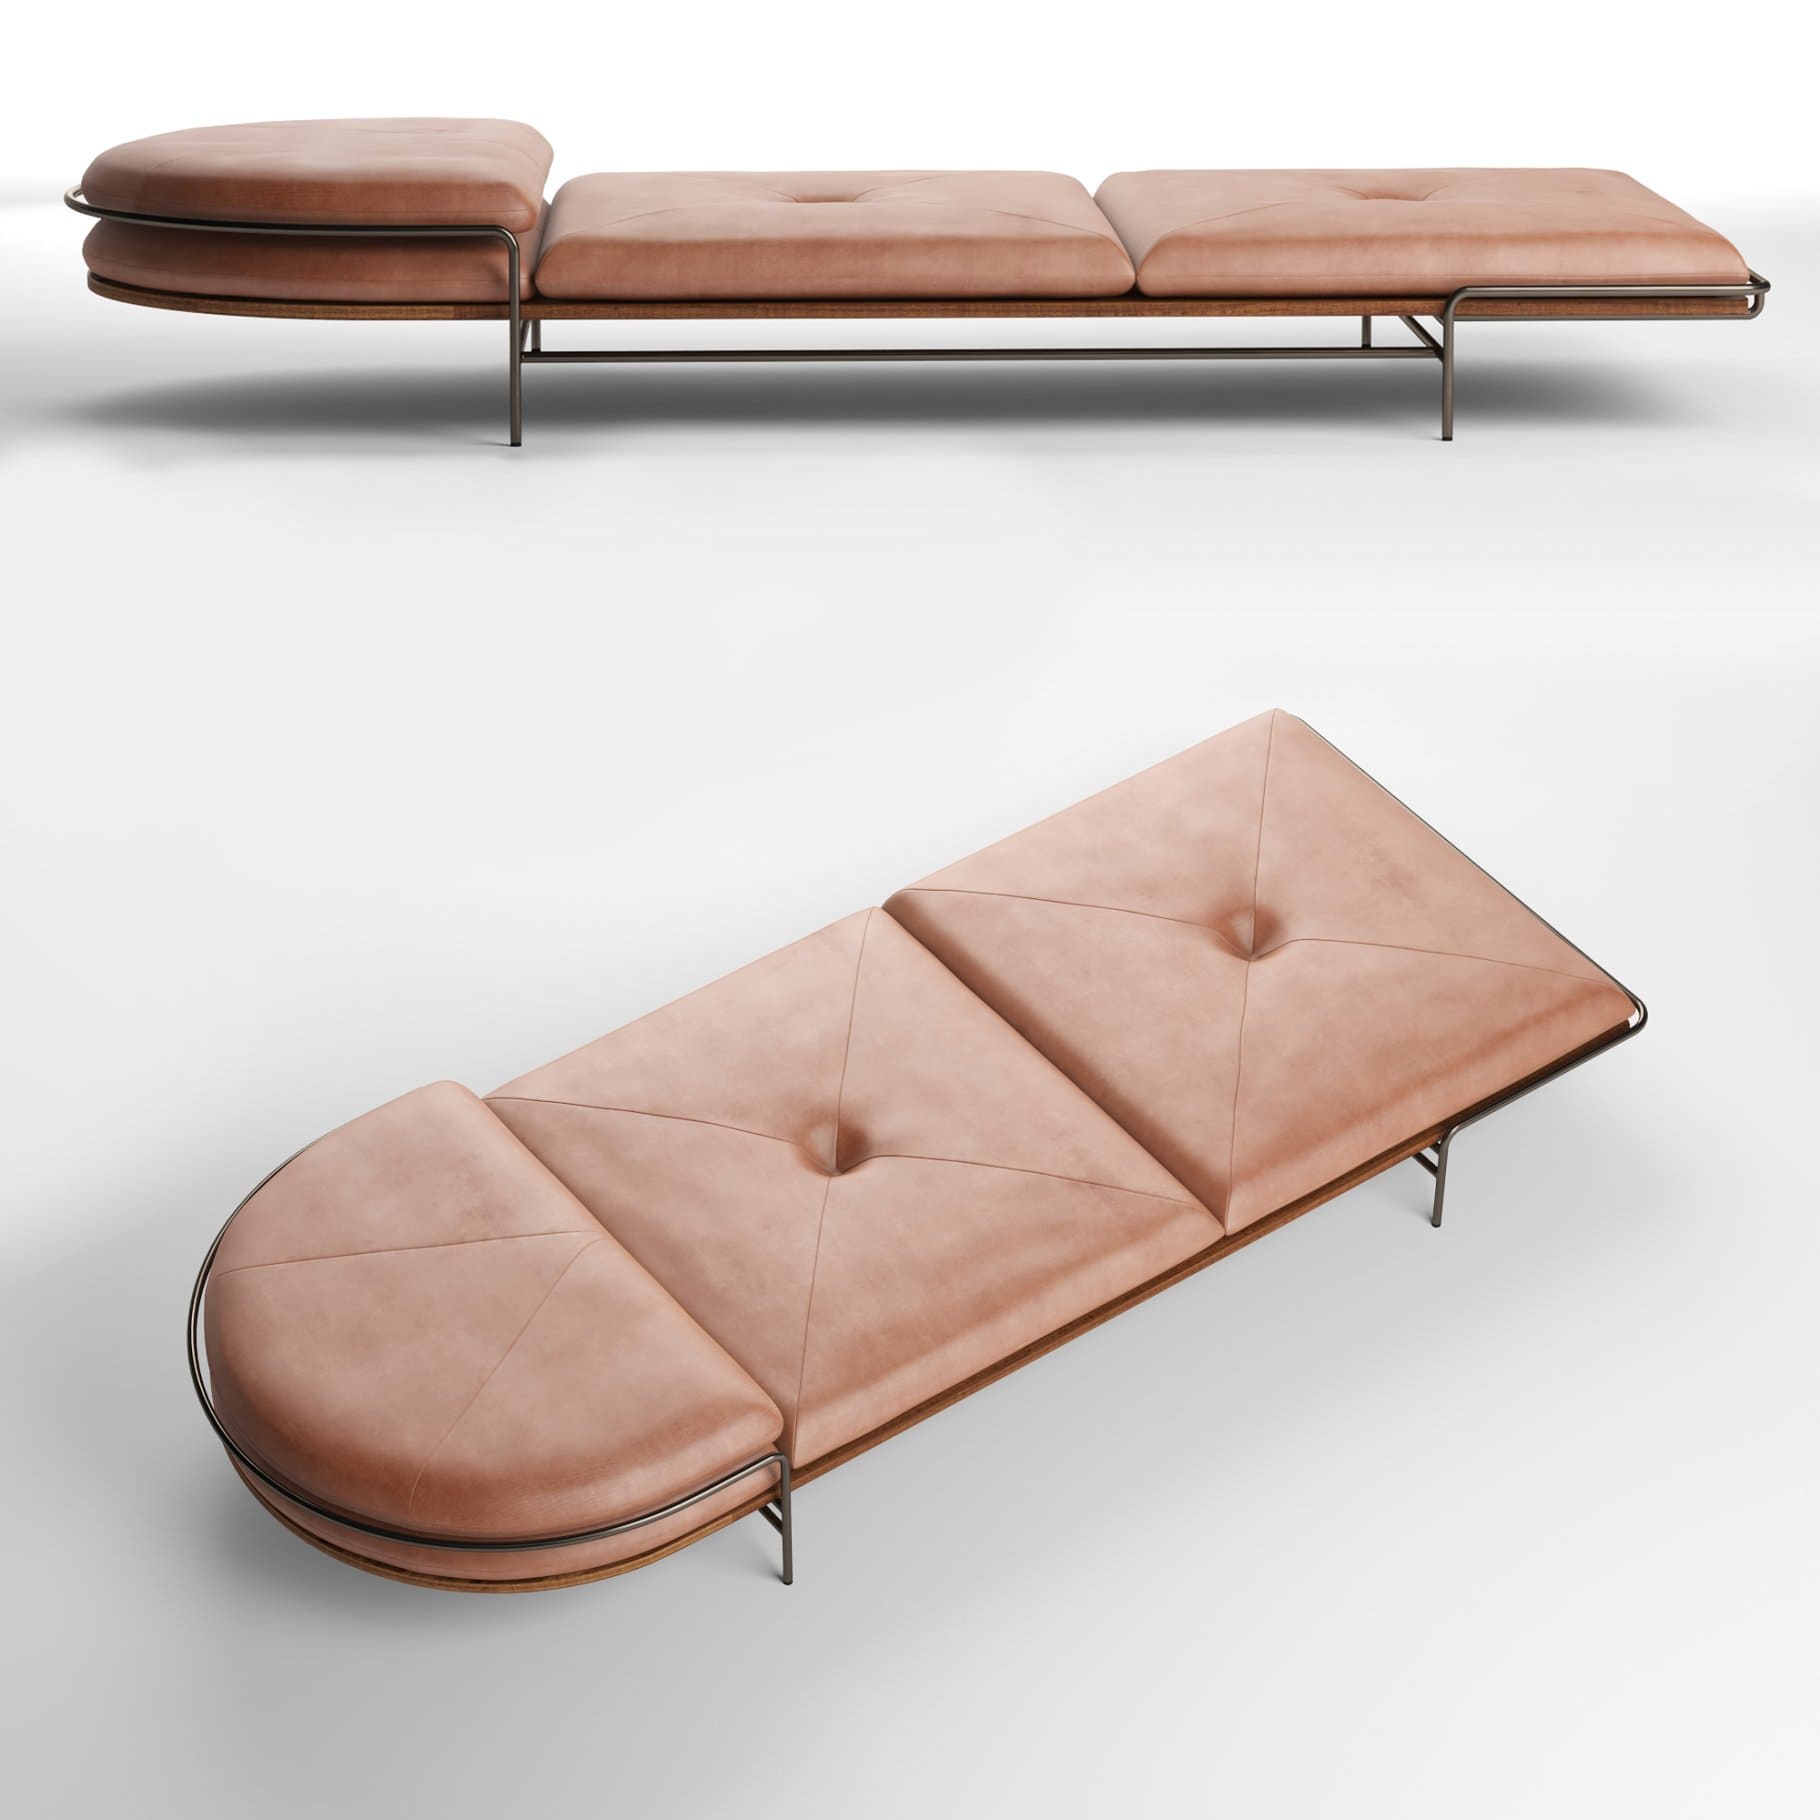 Top and side view Geometric Daybed by Bassam fellows.